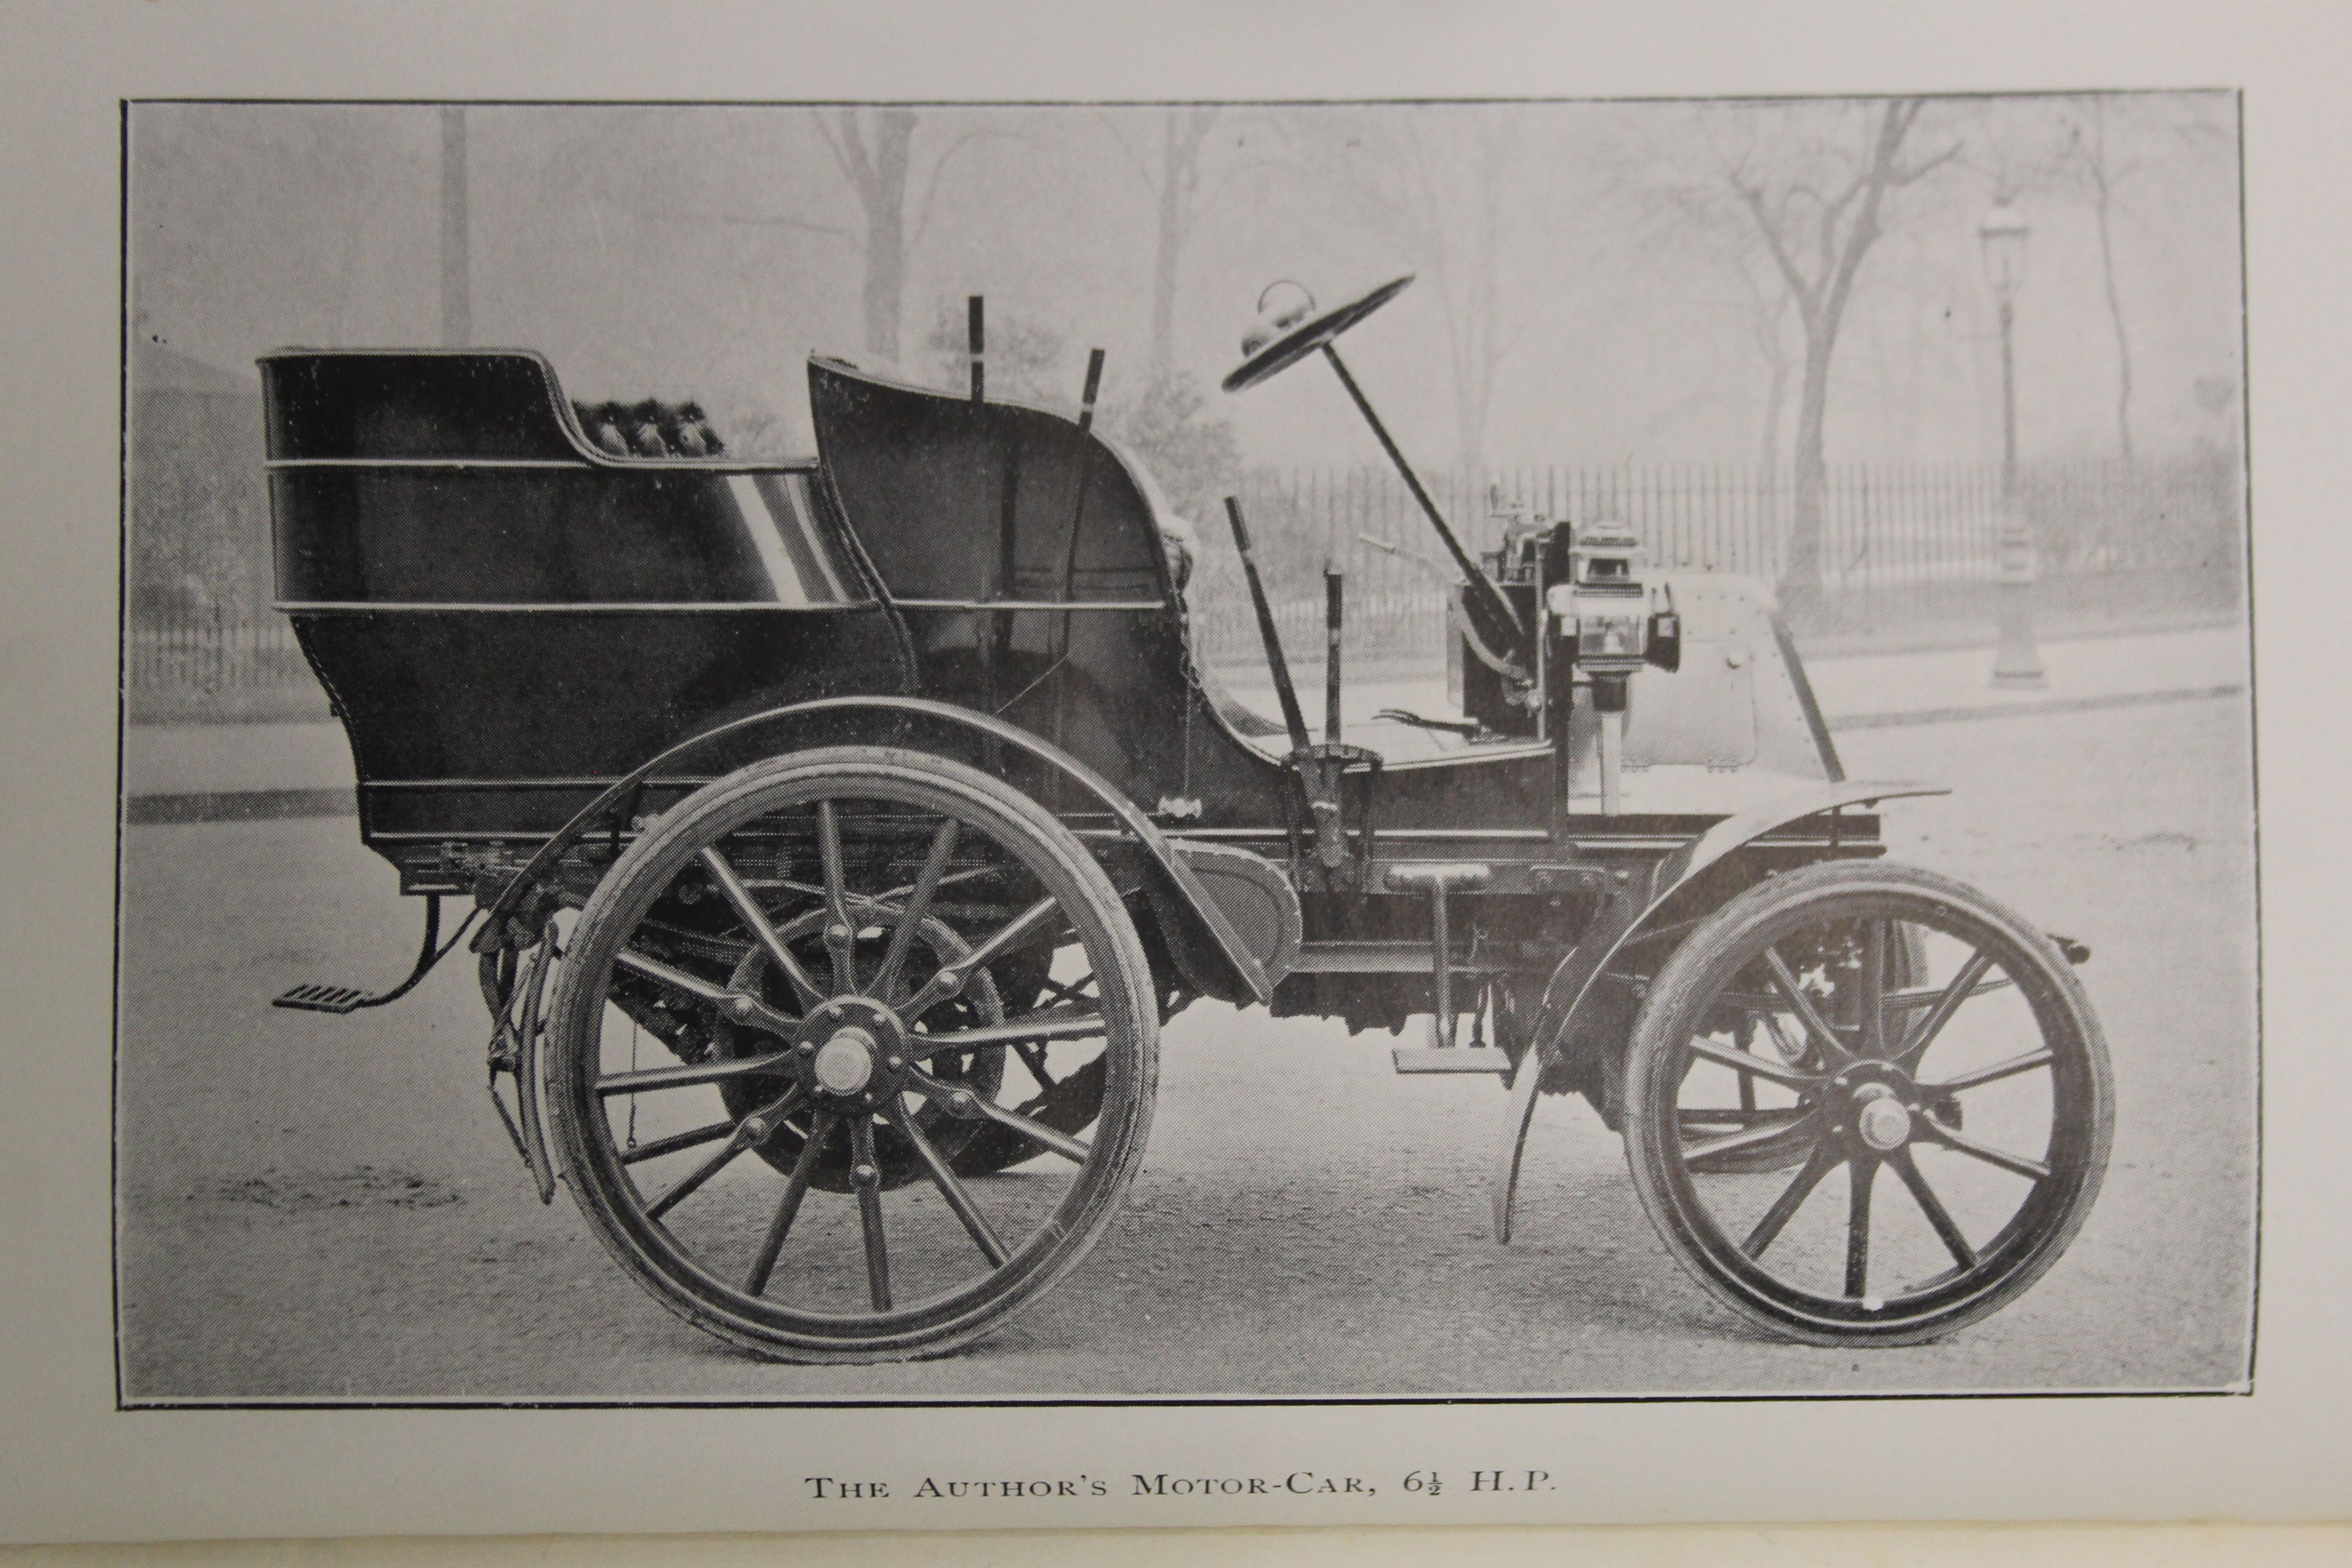 Thompson (Sir Henry), The Motor-Car Its Nature, Use and Management, Frederick Warne, - Image 7 of 56